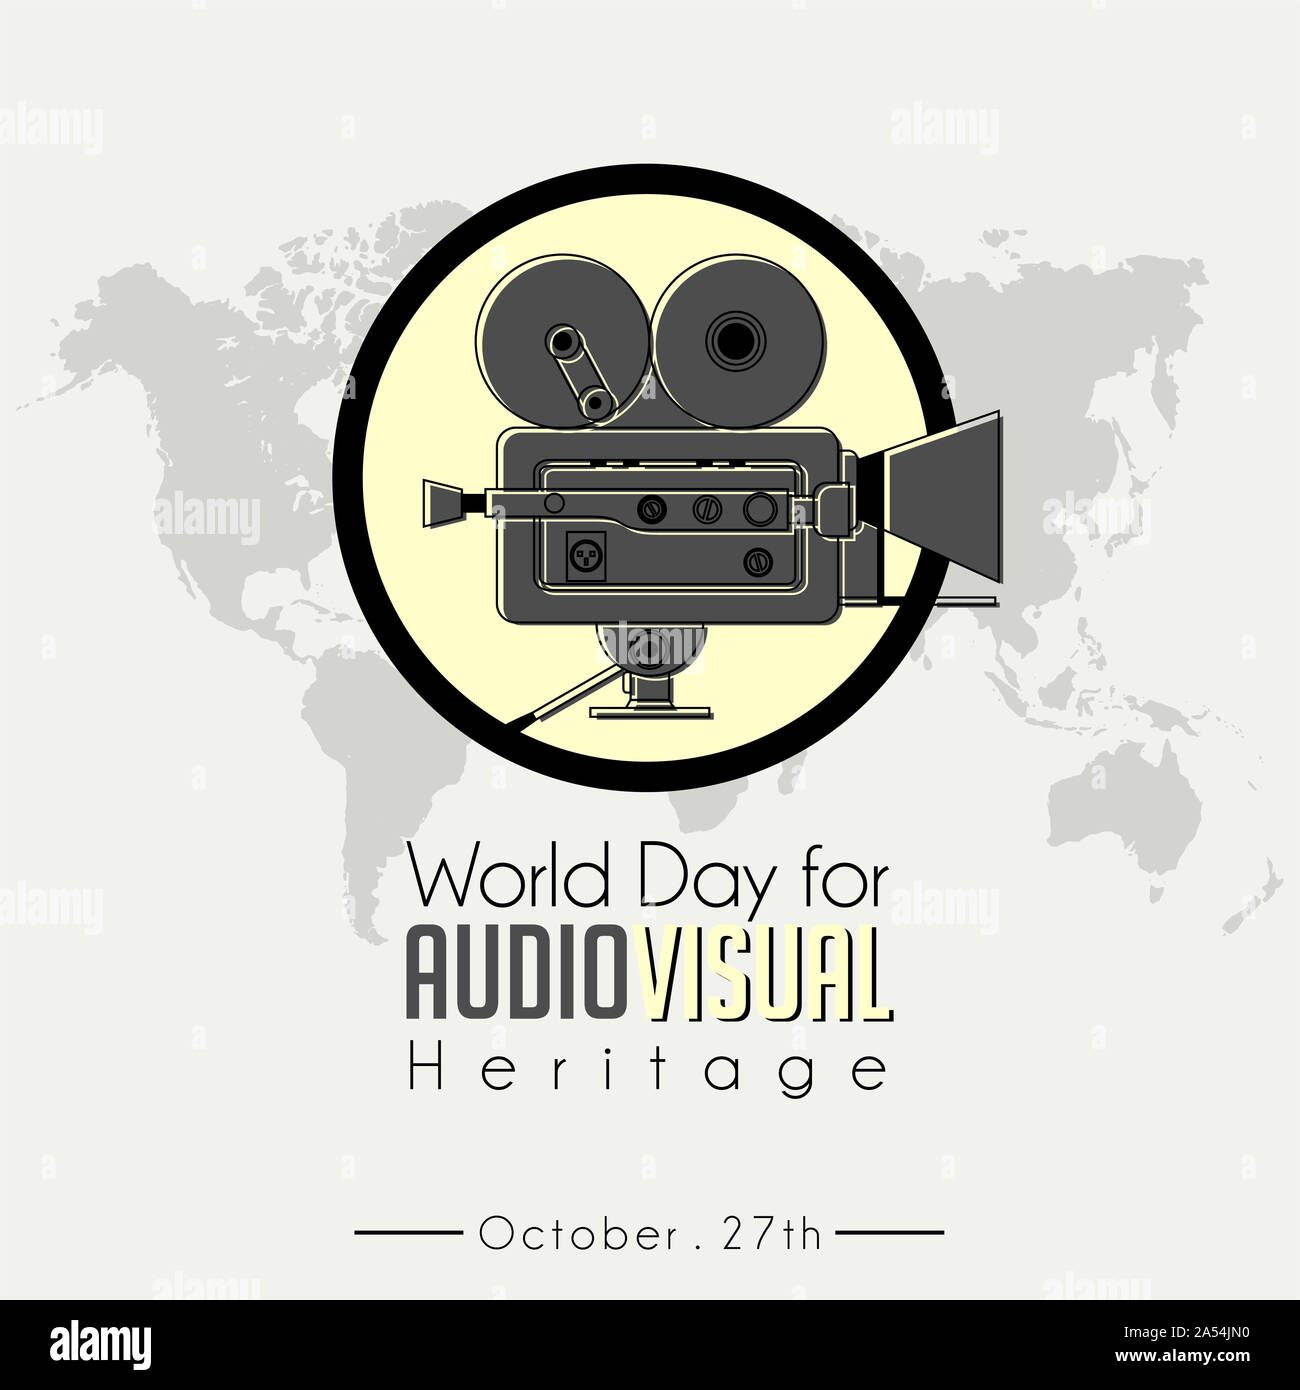 World Day For Audio Visual heritage, celebrate on October 27th, with Classic Vintage Camcorder (old movie Camera) icon vector Stock Photo